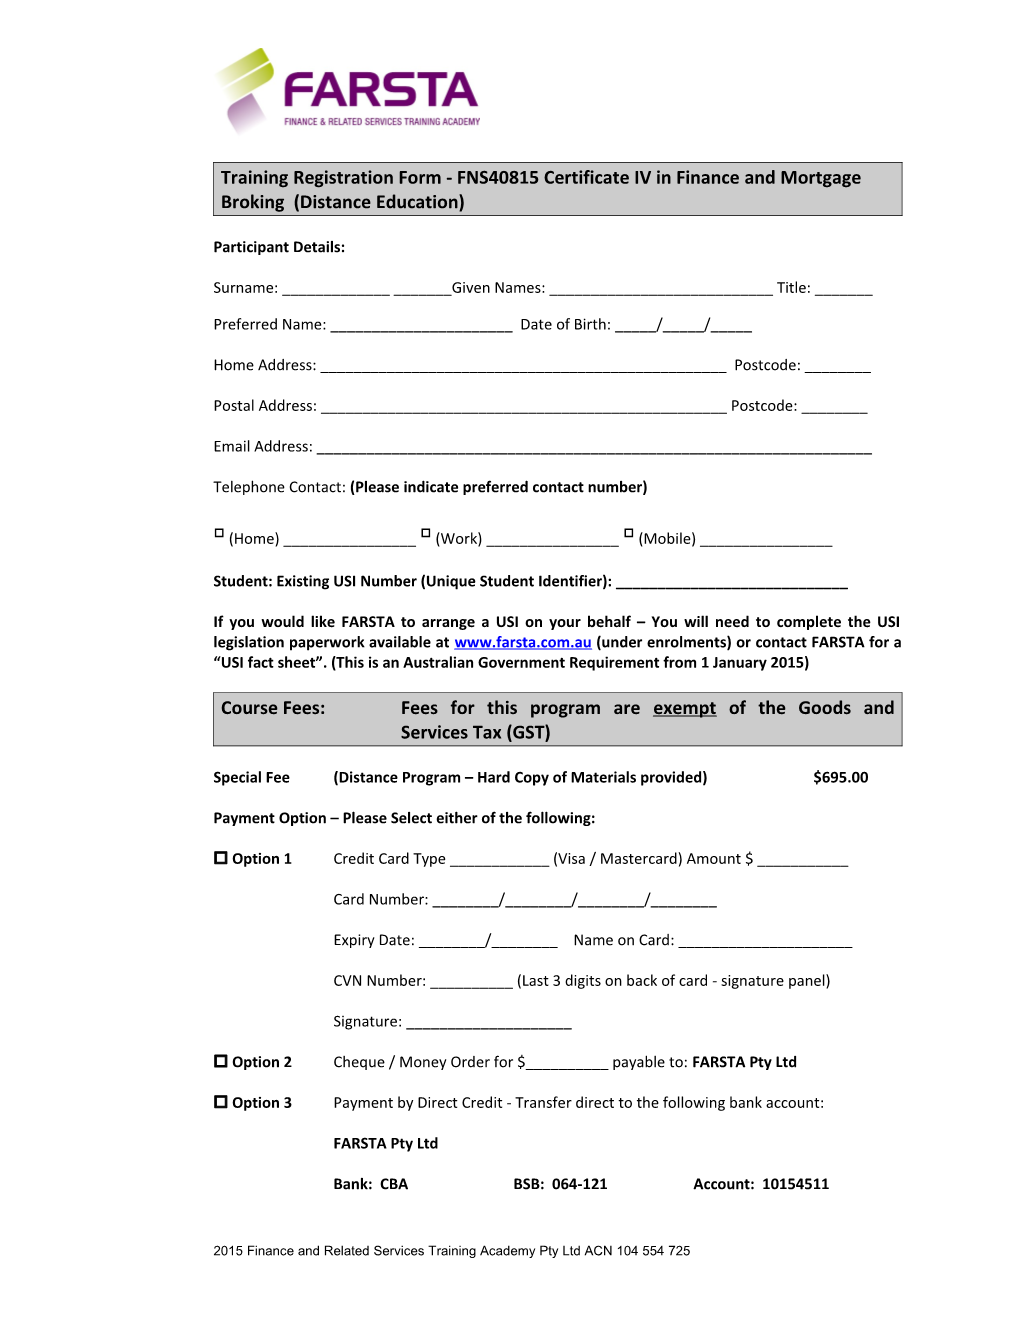 Training Registration Form - Fns40815certificate IV in Finance and Mortgage Broking (Distance